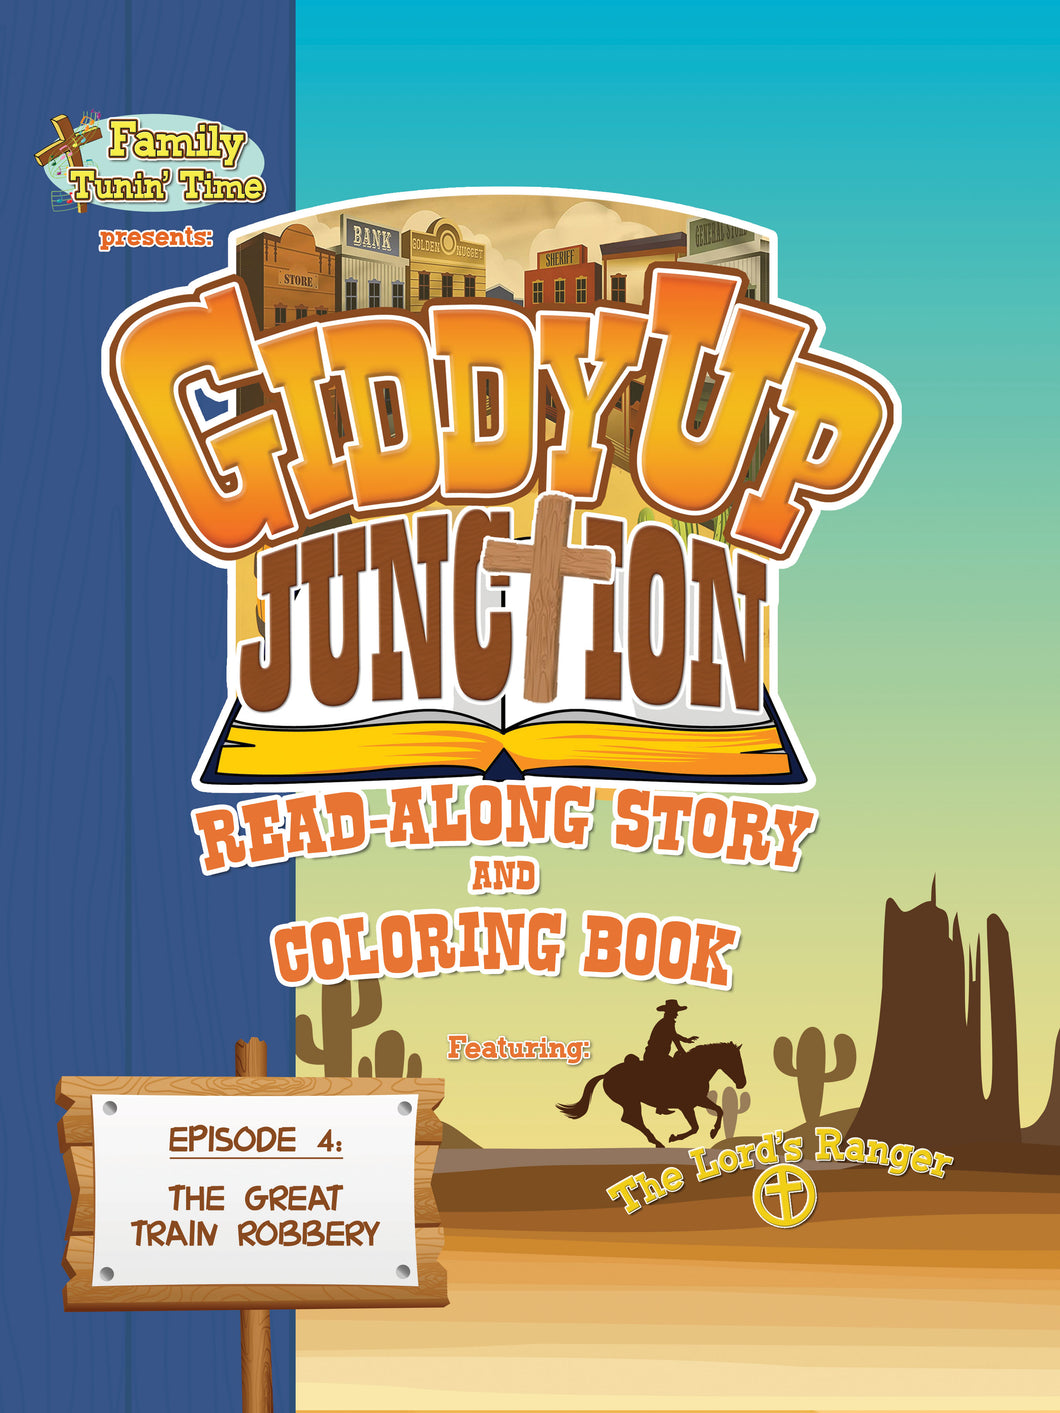 GIDDY UP JUNCTION EPISODE 4: THE GREAT TRAIN ROBBERY